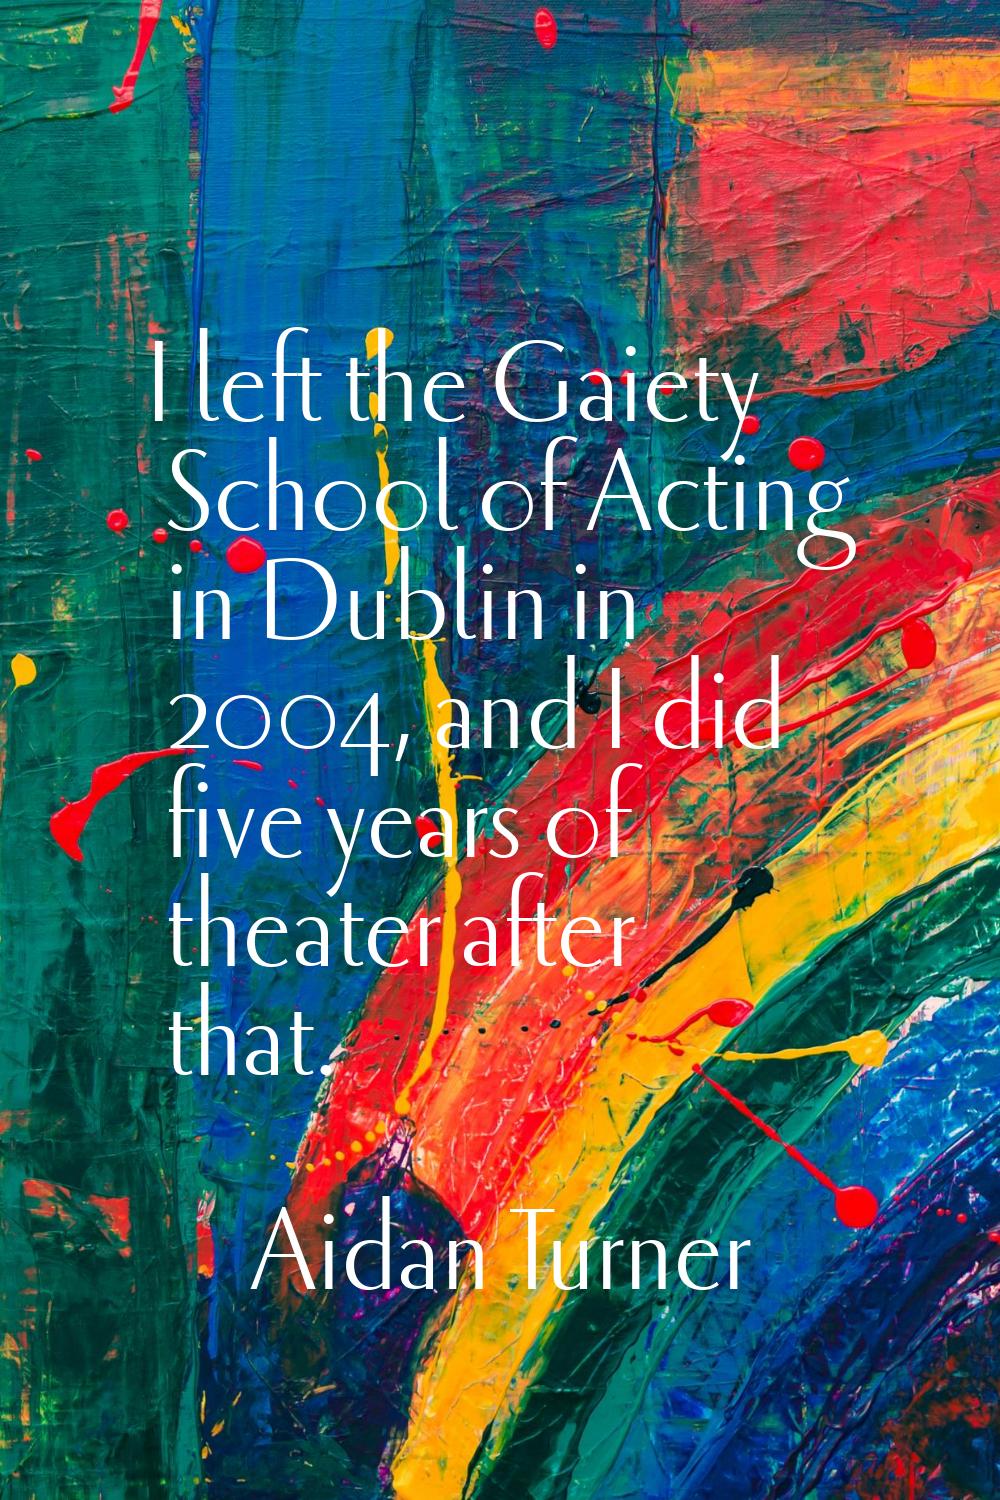 I left the Gaiety School of Acting in Dublin in 2004, and I did five years of theater after that.